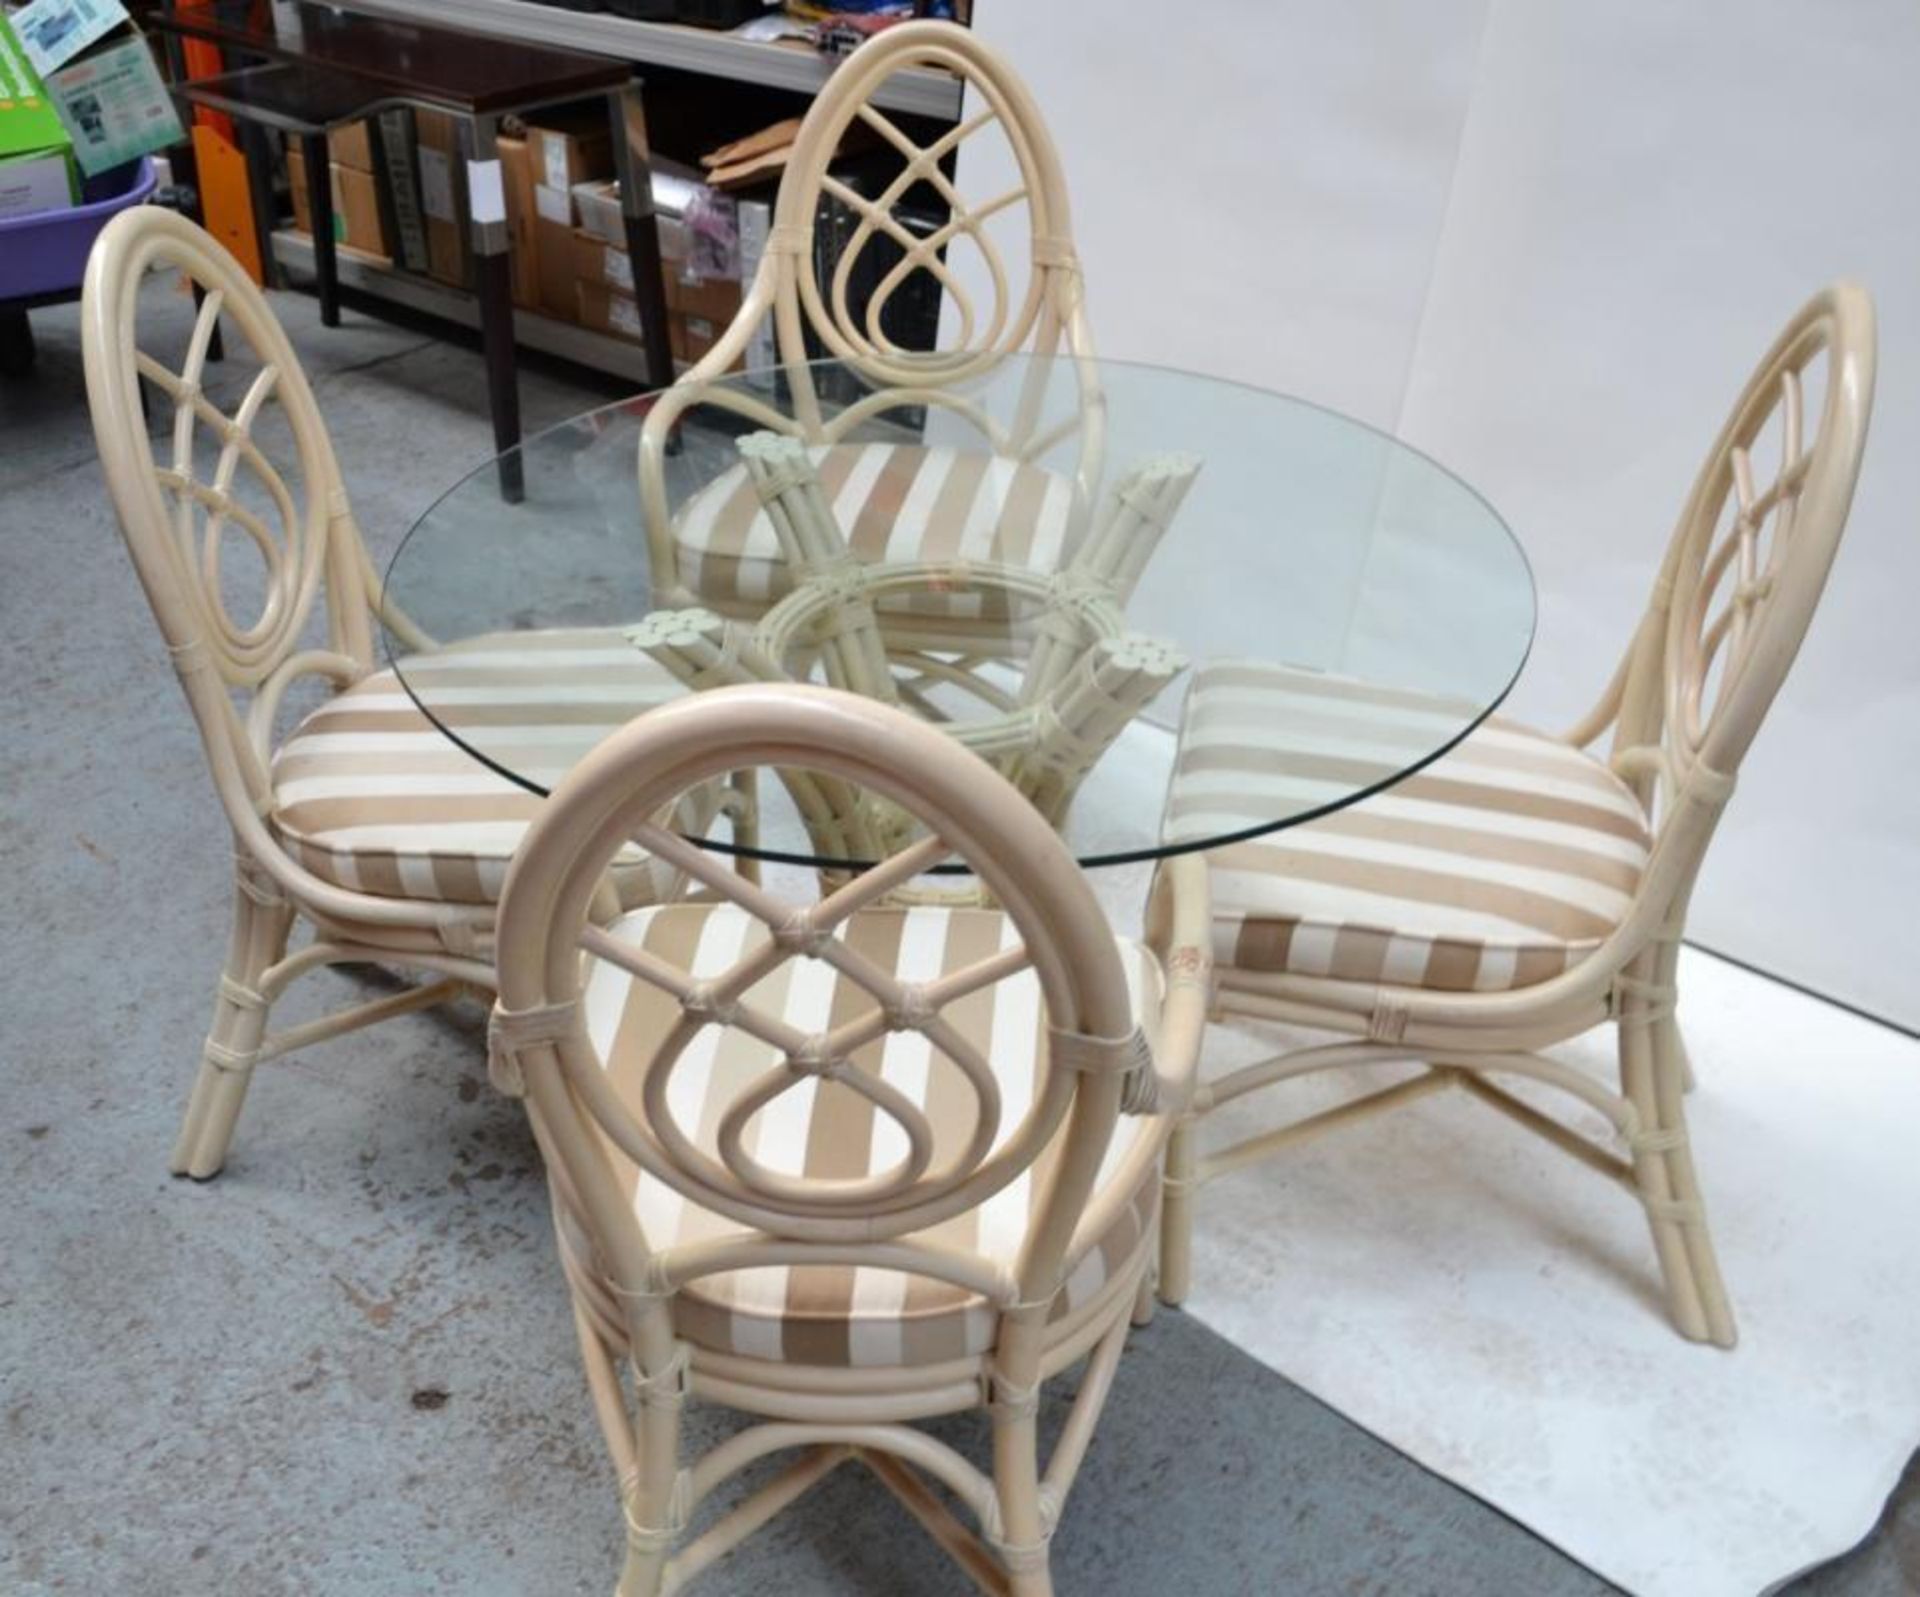 1 x Glass Topped Cane Table with 4 Chairs - Pre-owned In Good Condition - AE010 - CL007 - Location: - Image 6 of 13